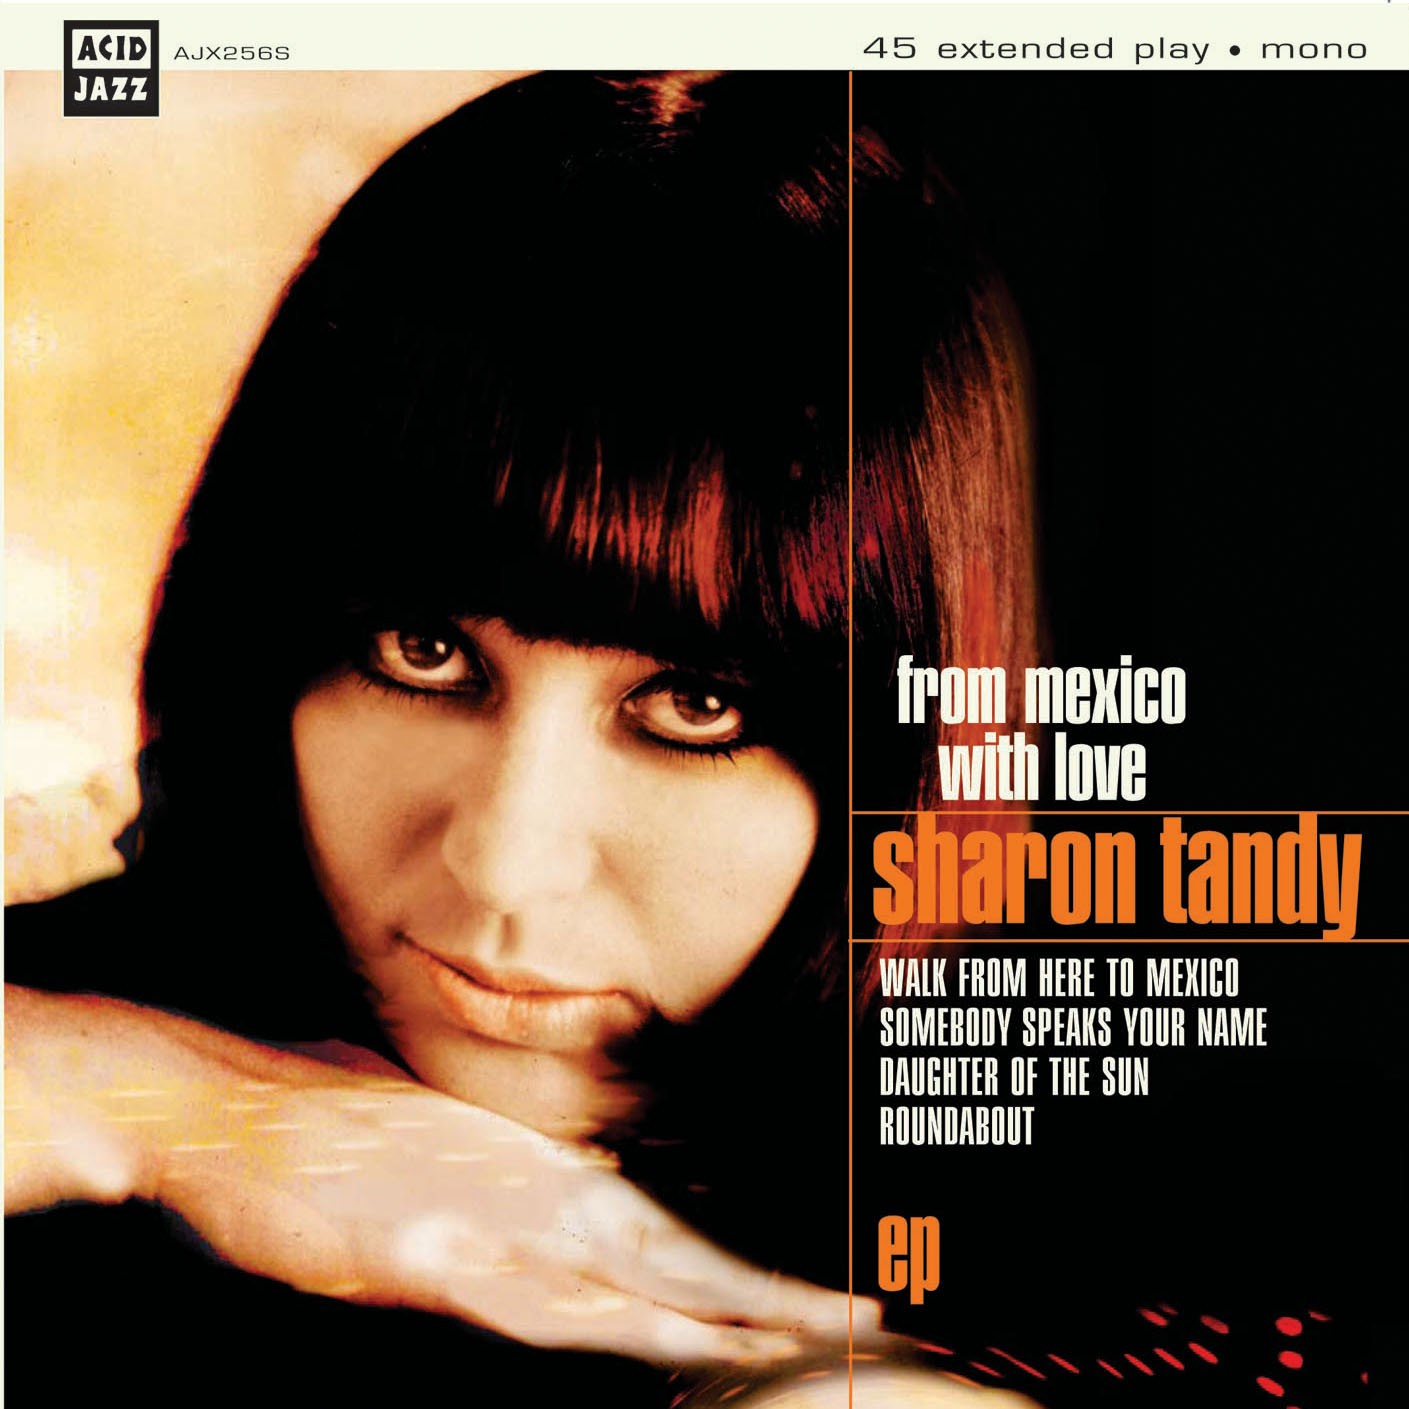 Sharon Tandy/FROM MEXICO WITH LOVE EP 7"